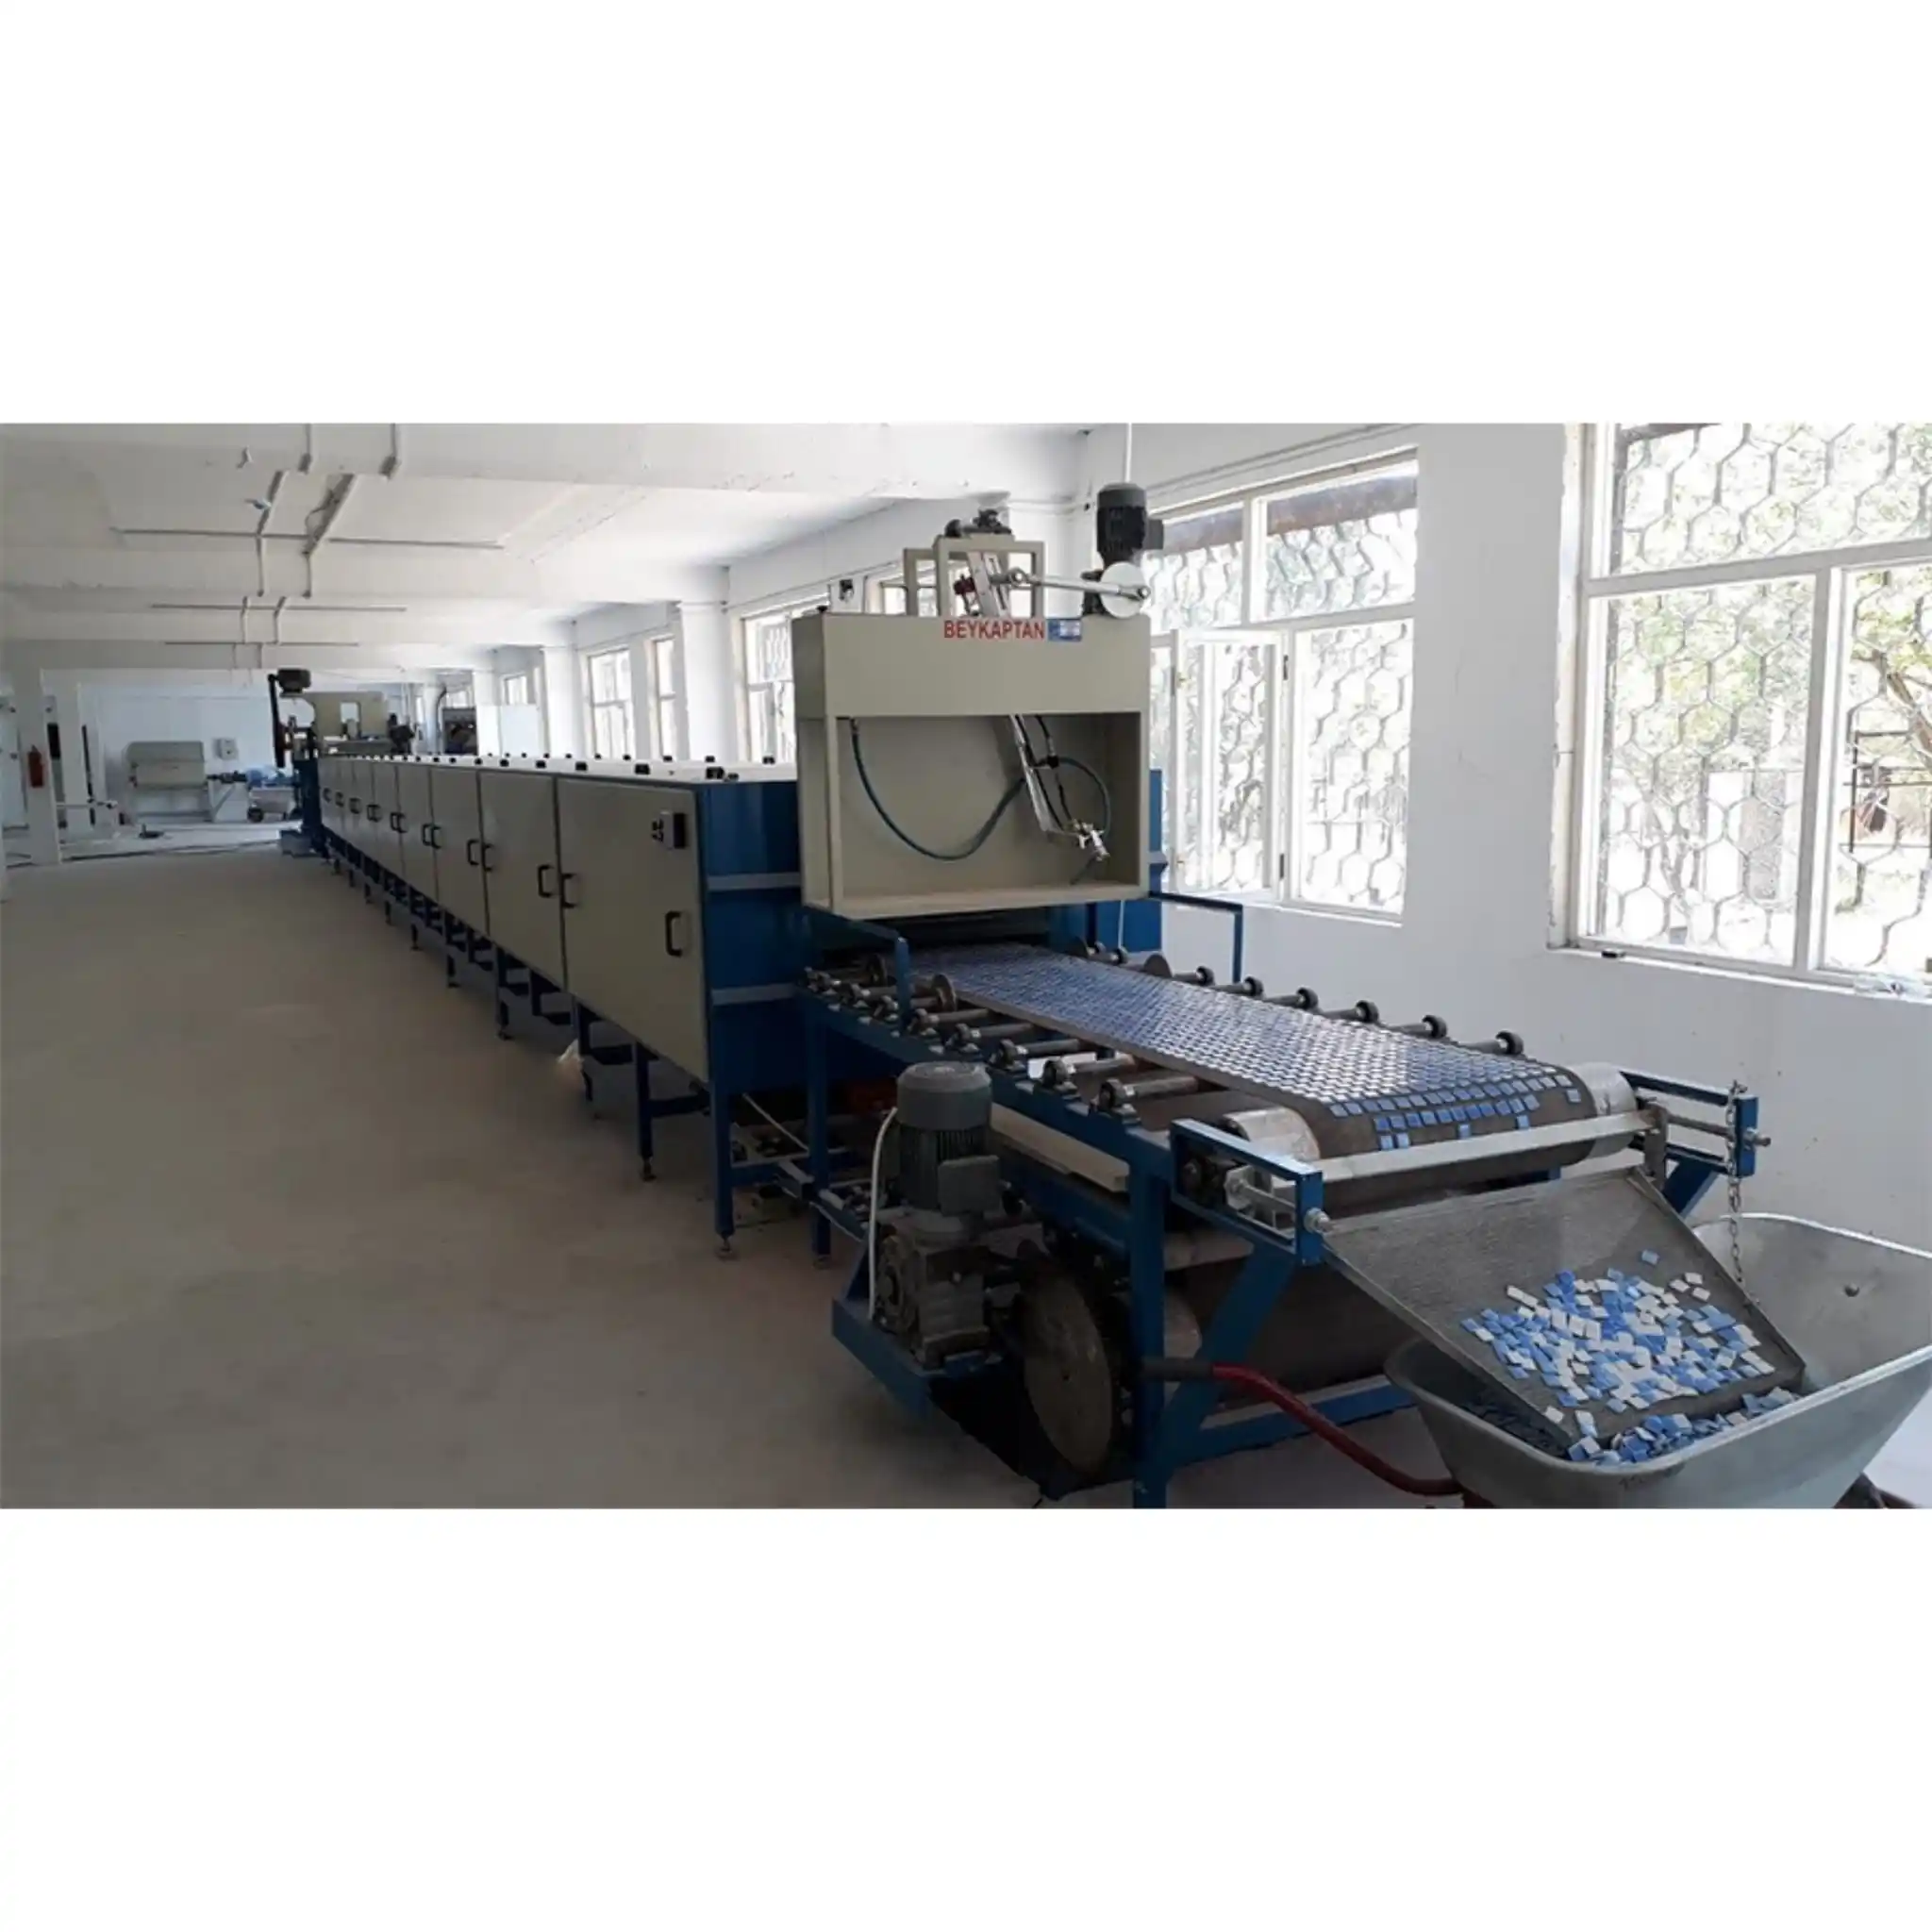 High Quality Glass Mosaic Machine Line - Wholesale Product - 27 Meters Long - 30 Tone Weight-Blue and White Glass Mosaic Line